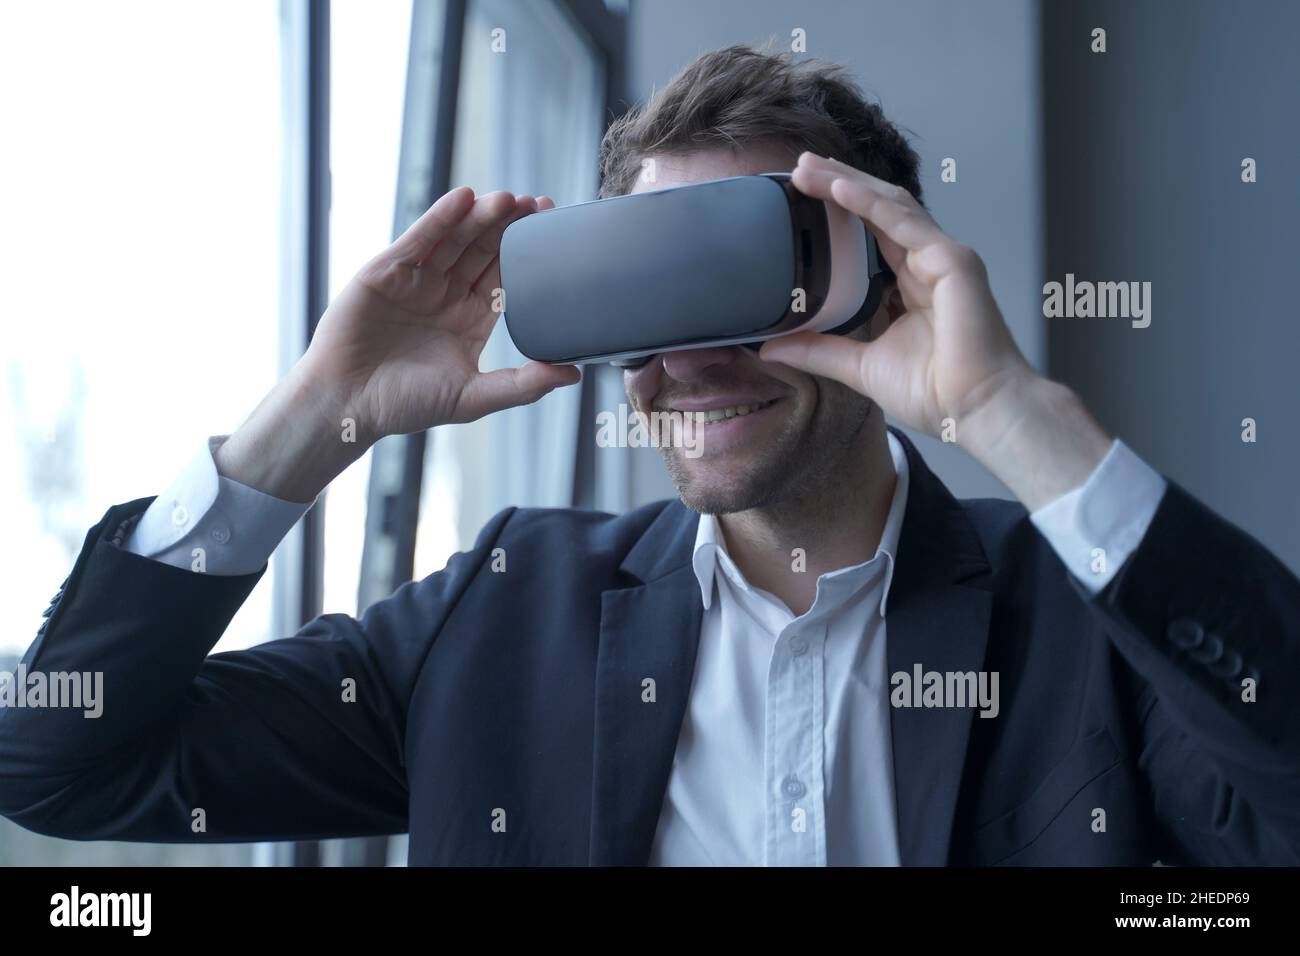 Excited business person in suit wearing VR headset on head taking part in meeting in virtual reality Stock Photo